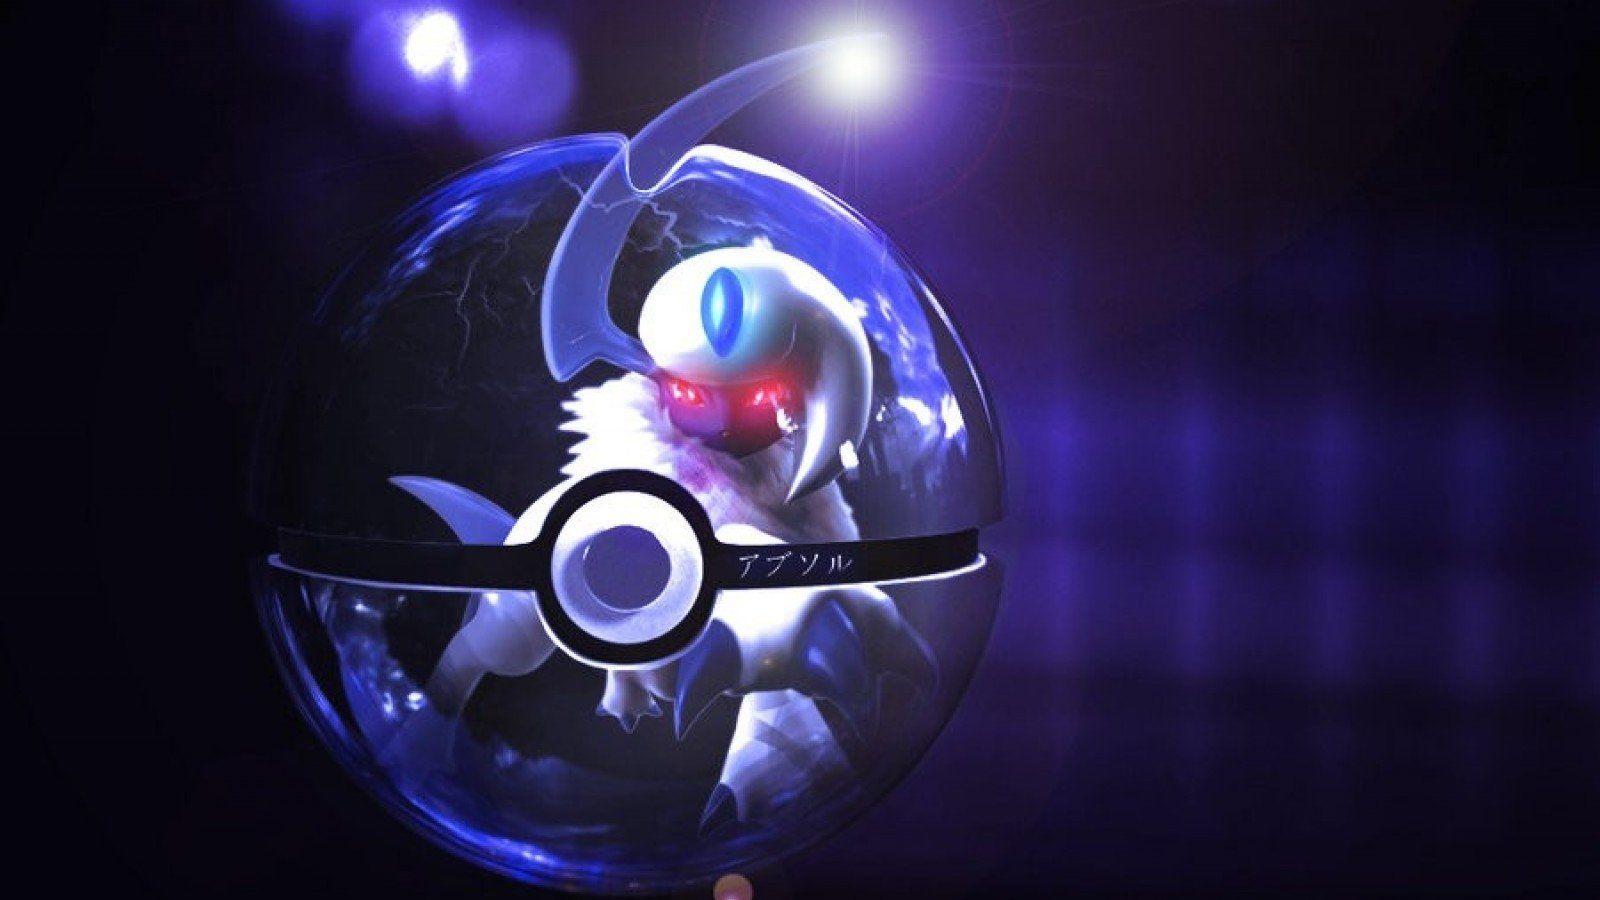 Absol (Pokémon) HD Wallpaper and Background Image